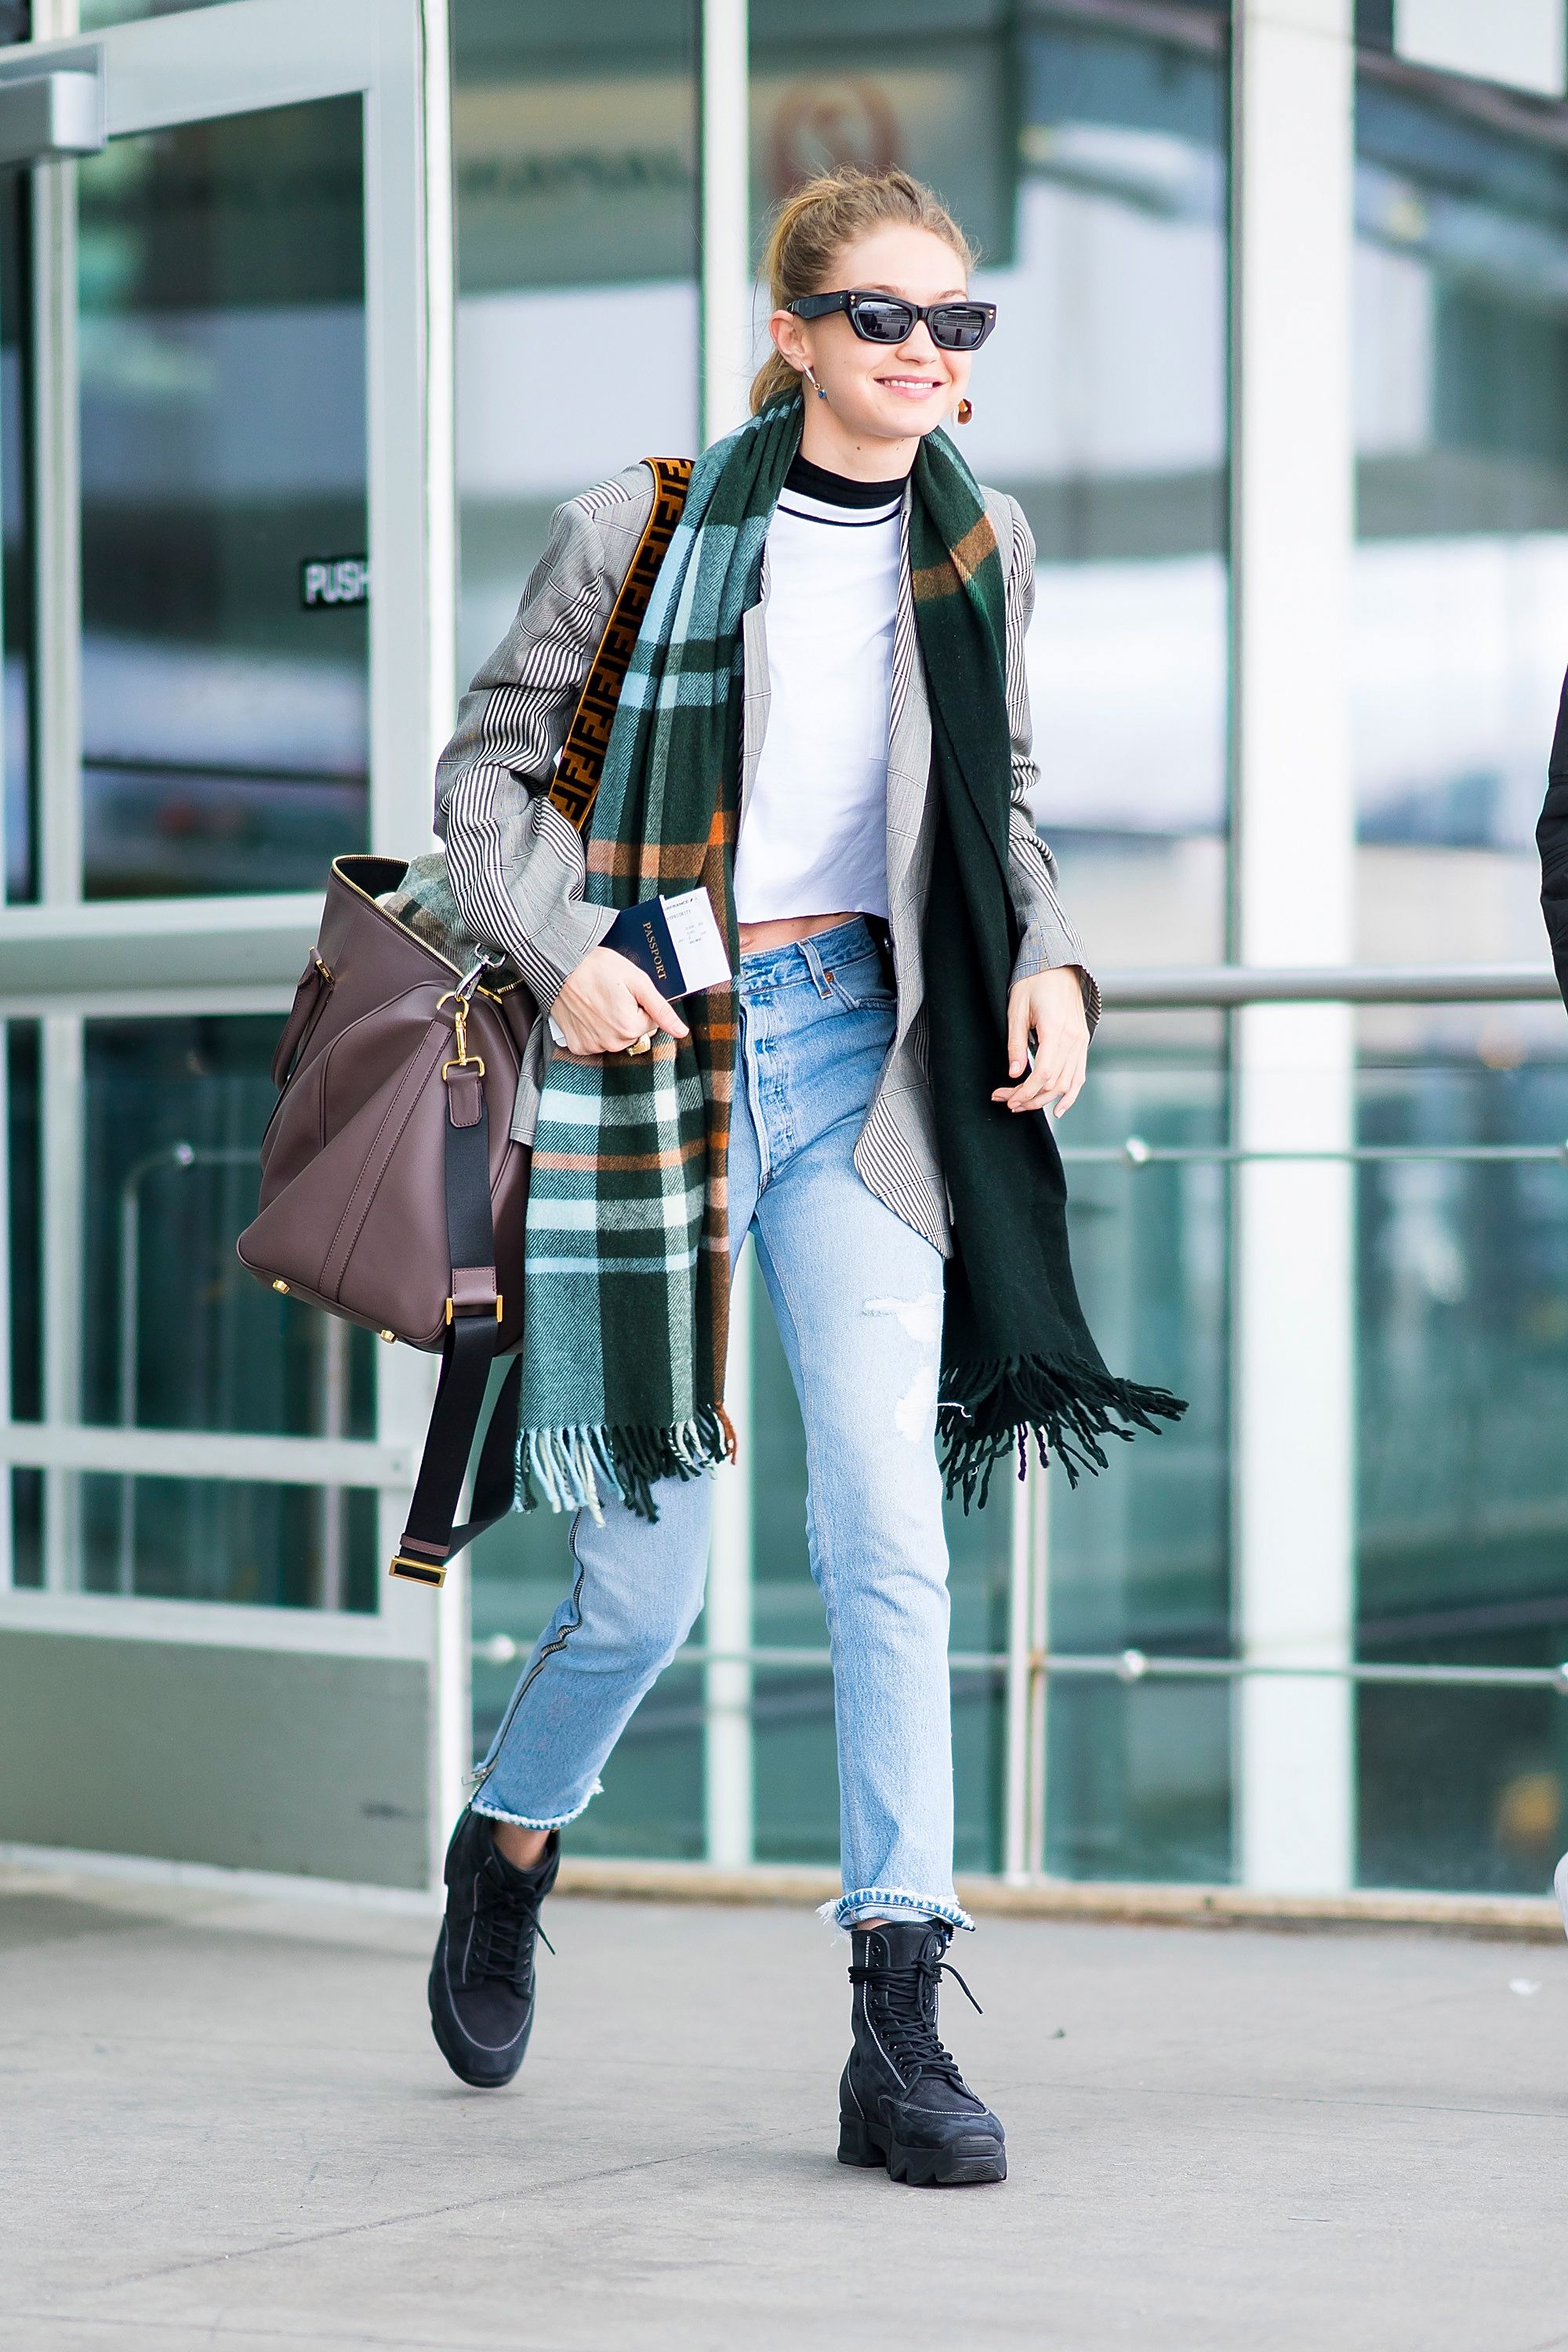 Airport Style, US travel and fashion